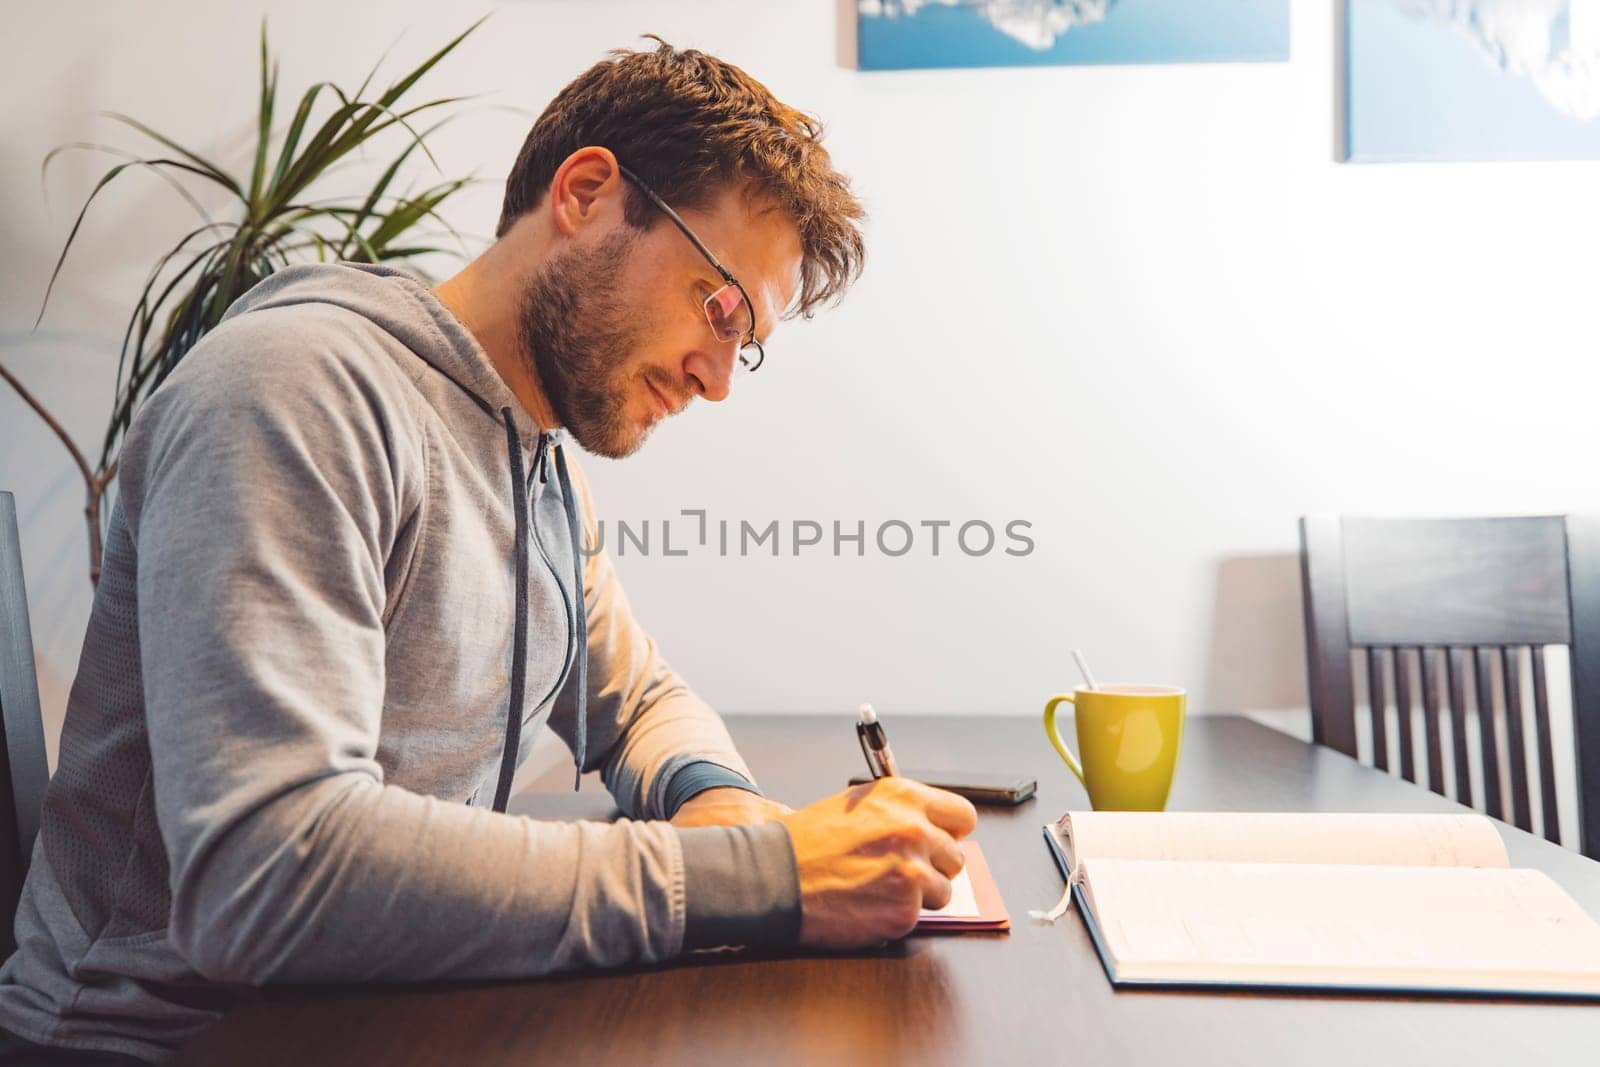 Smiling caucasian man freelancer using laptop studying online working from home, happy casual millennial guy typing on laptop surfing internet looking at screen enjoying distant job, sitting at a table. High quality photo